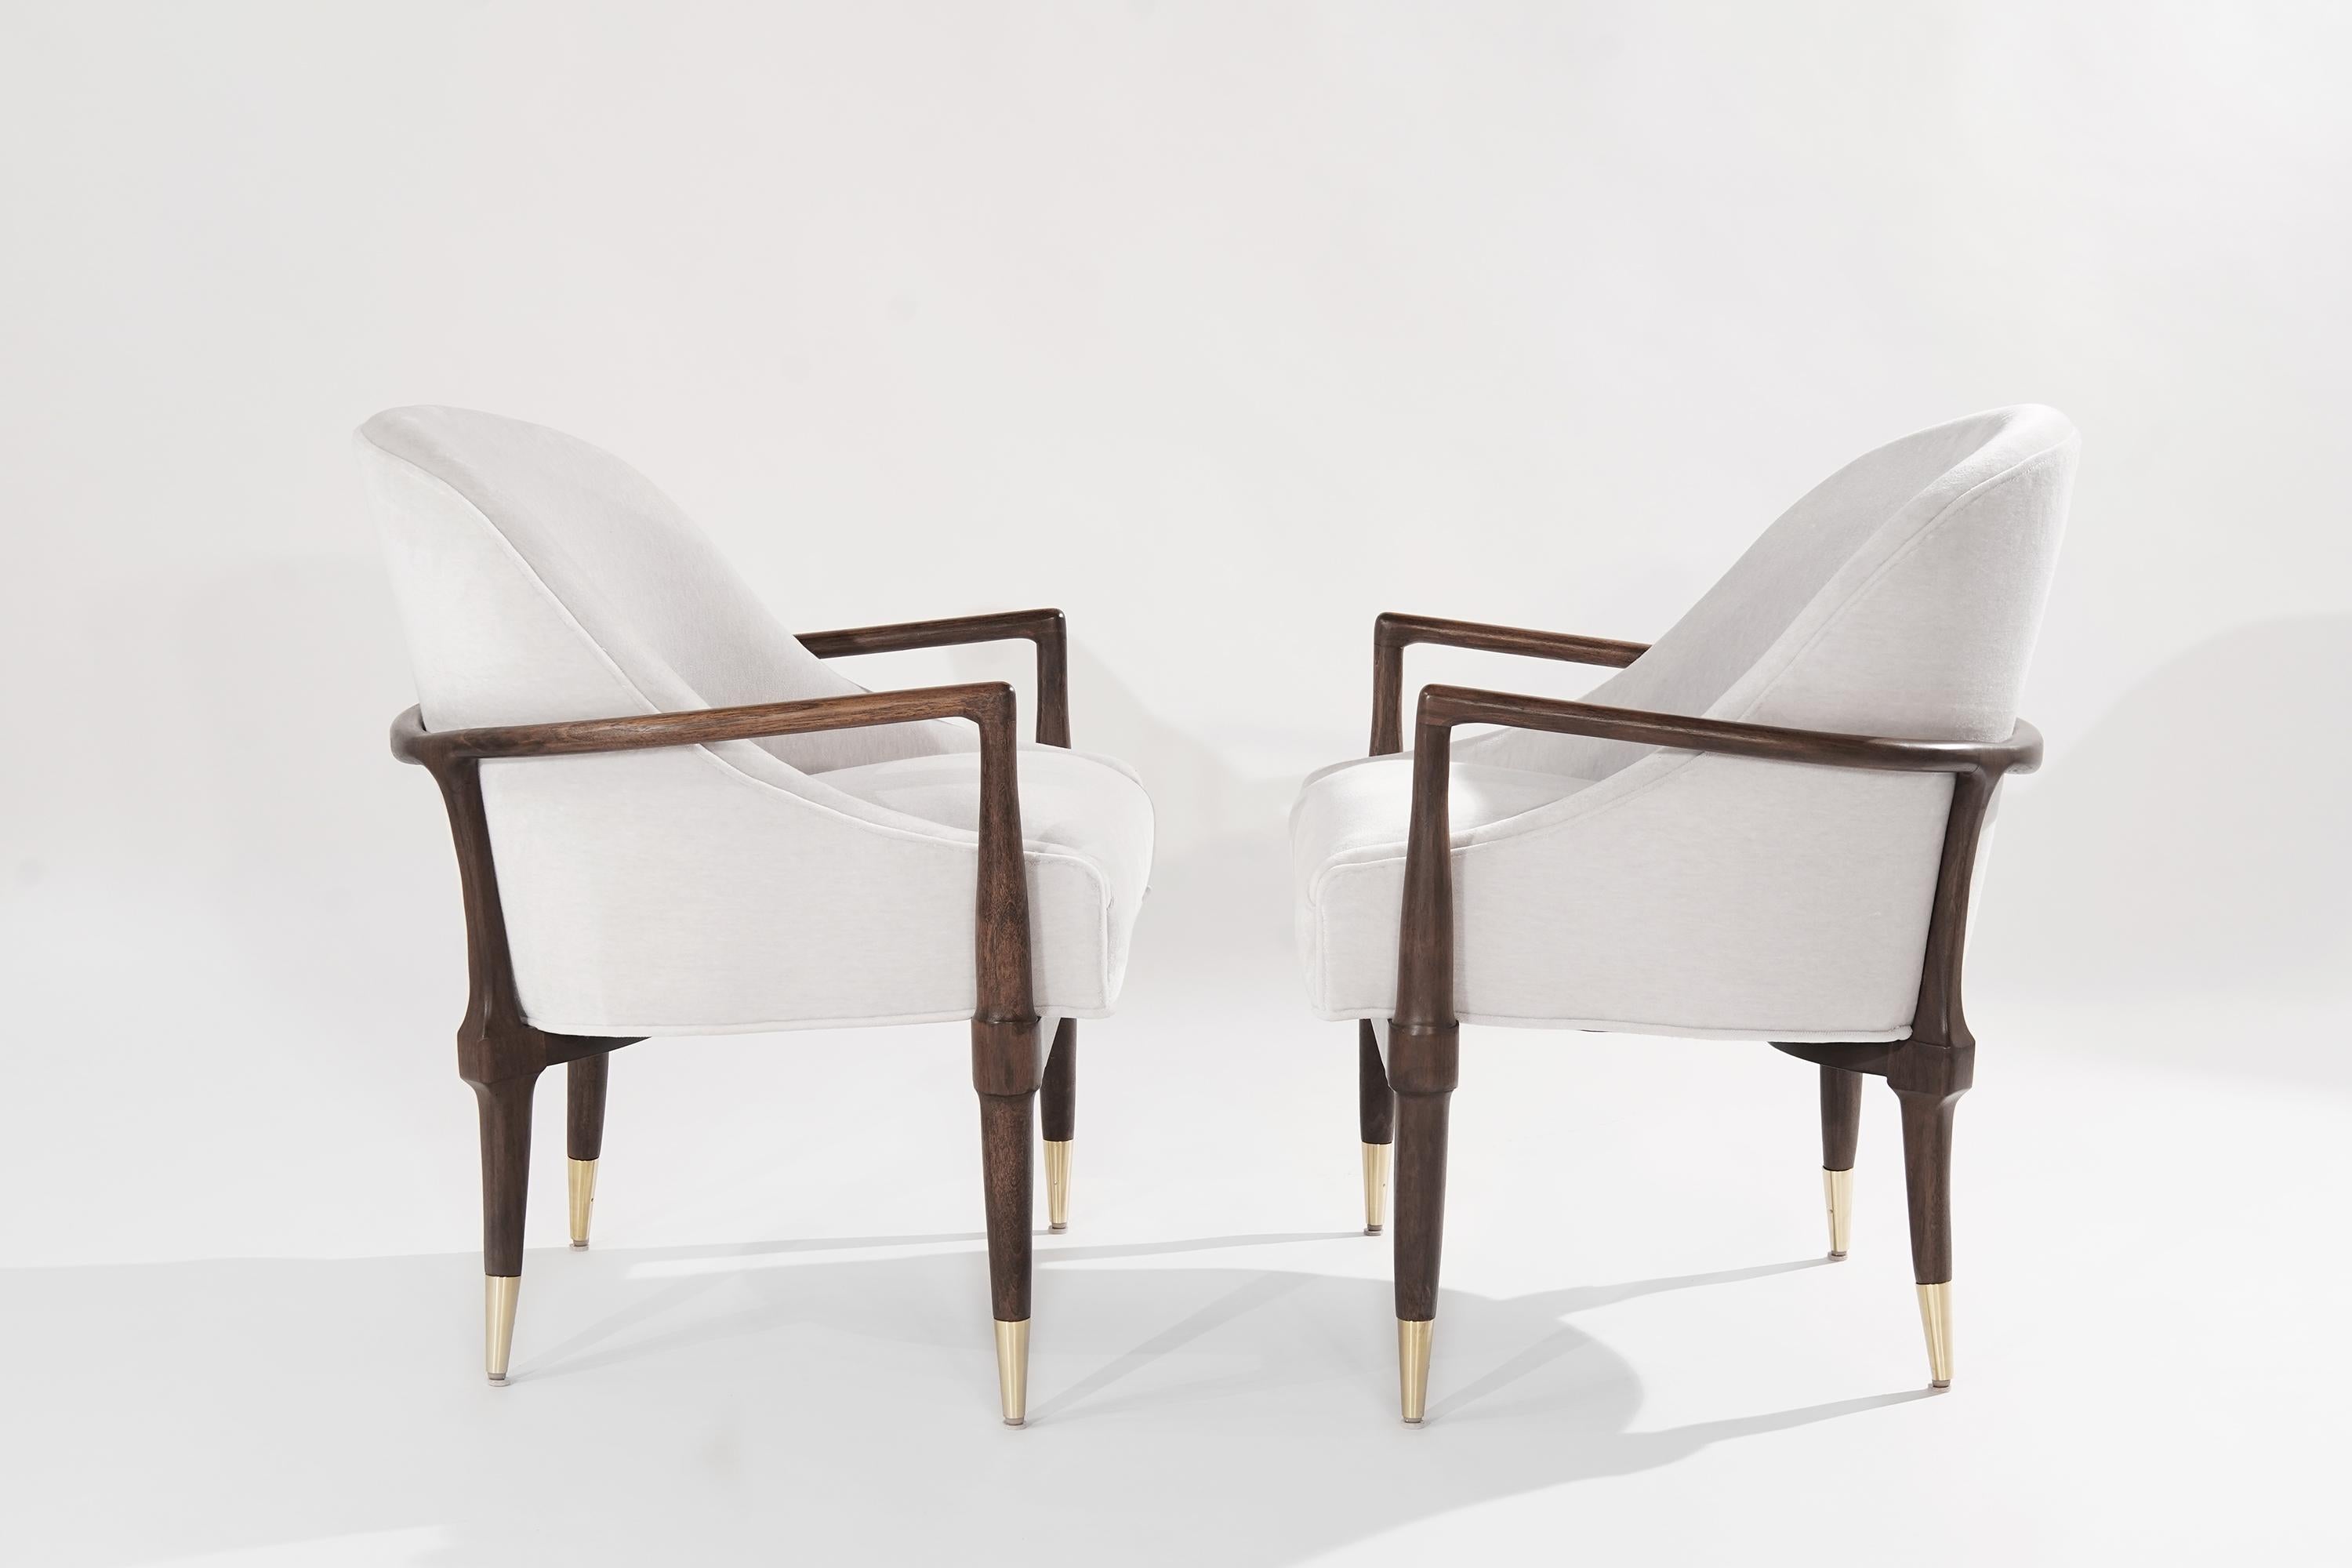 Pair of lounge chairs in the style of T.H. Robsjohn-Gibbings for Widdicomb. Featuring completely restored sculptural walnut frames and hand-polished brass sabots. 

Newly upholstered in off-white velvet by Holly Hunt.

Other designers working in